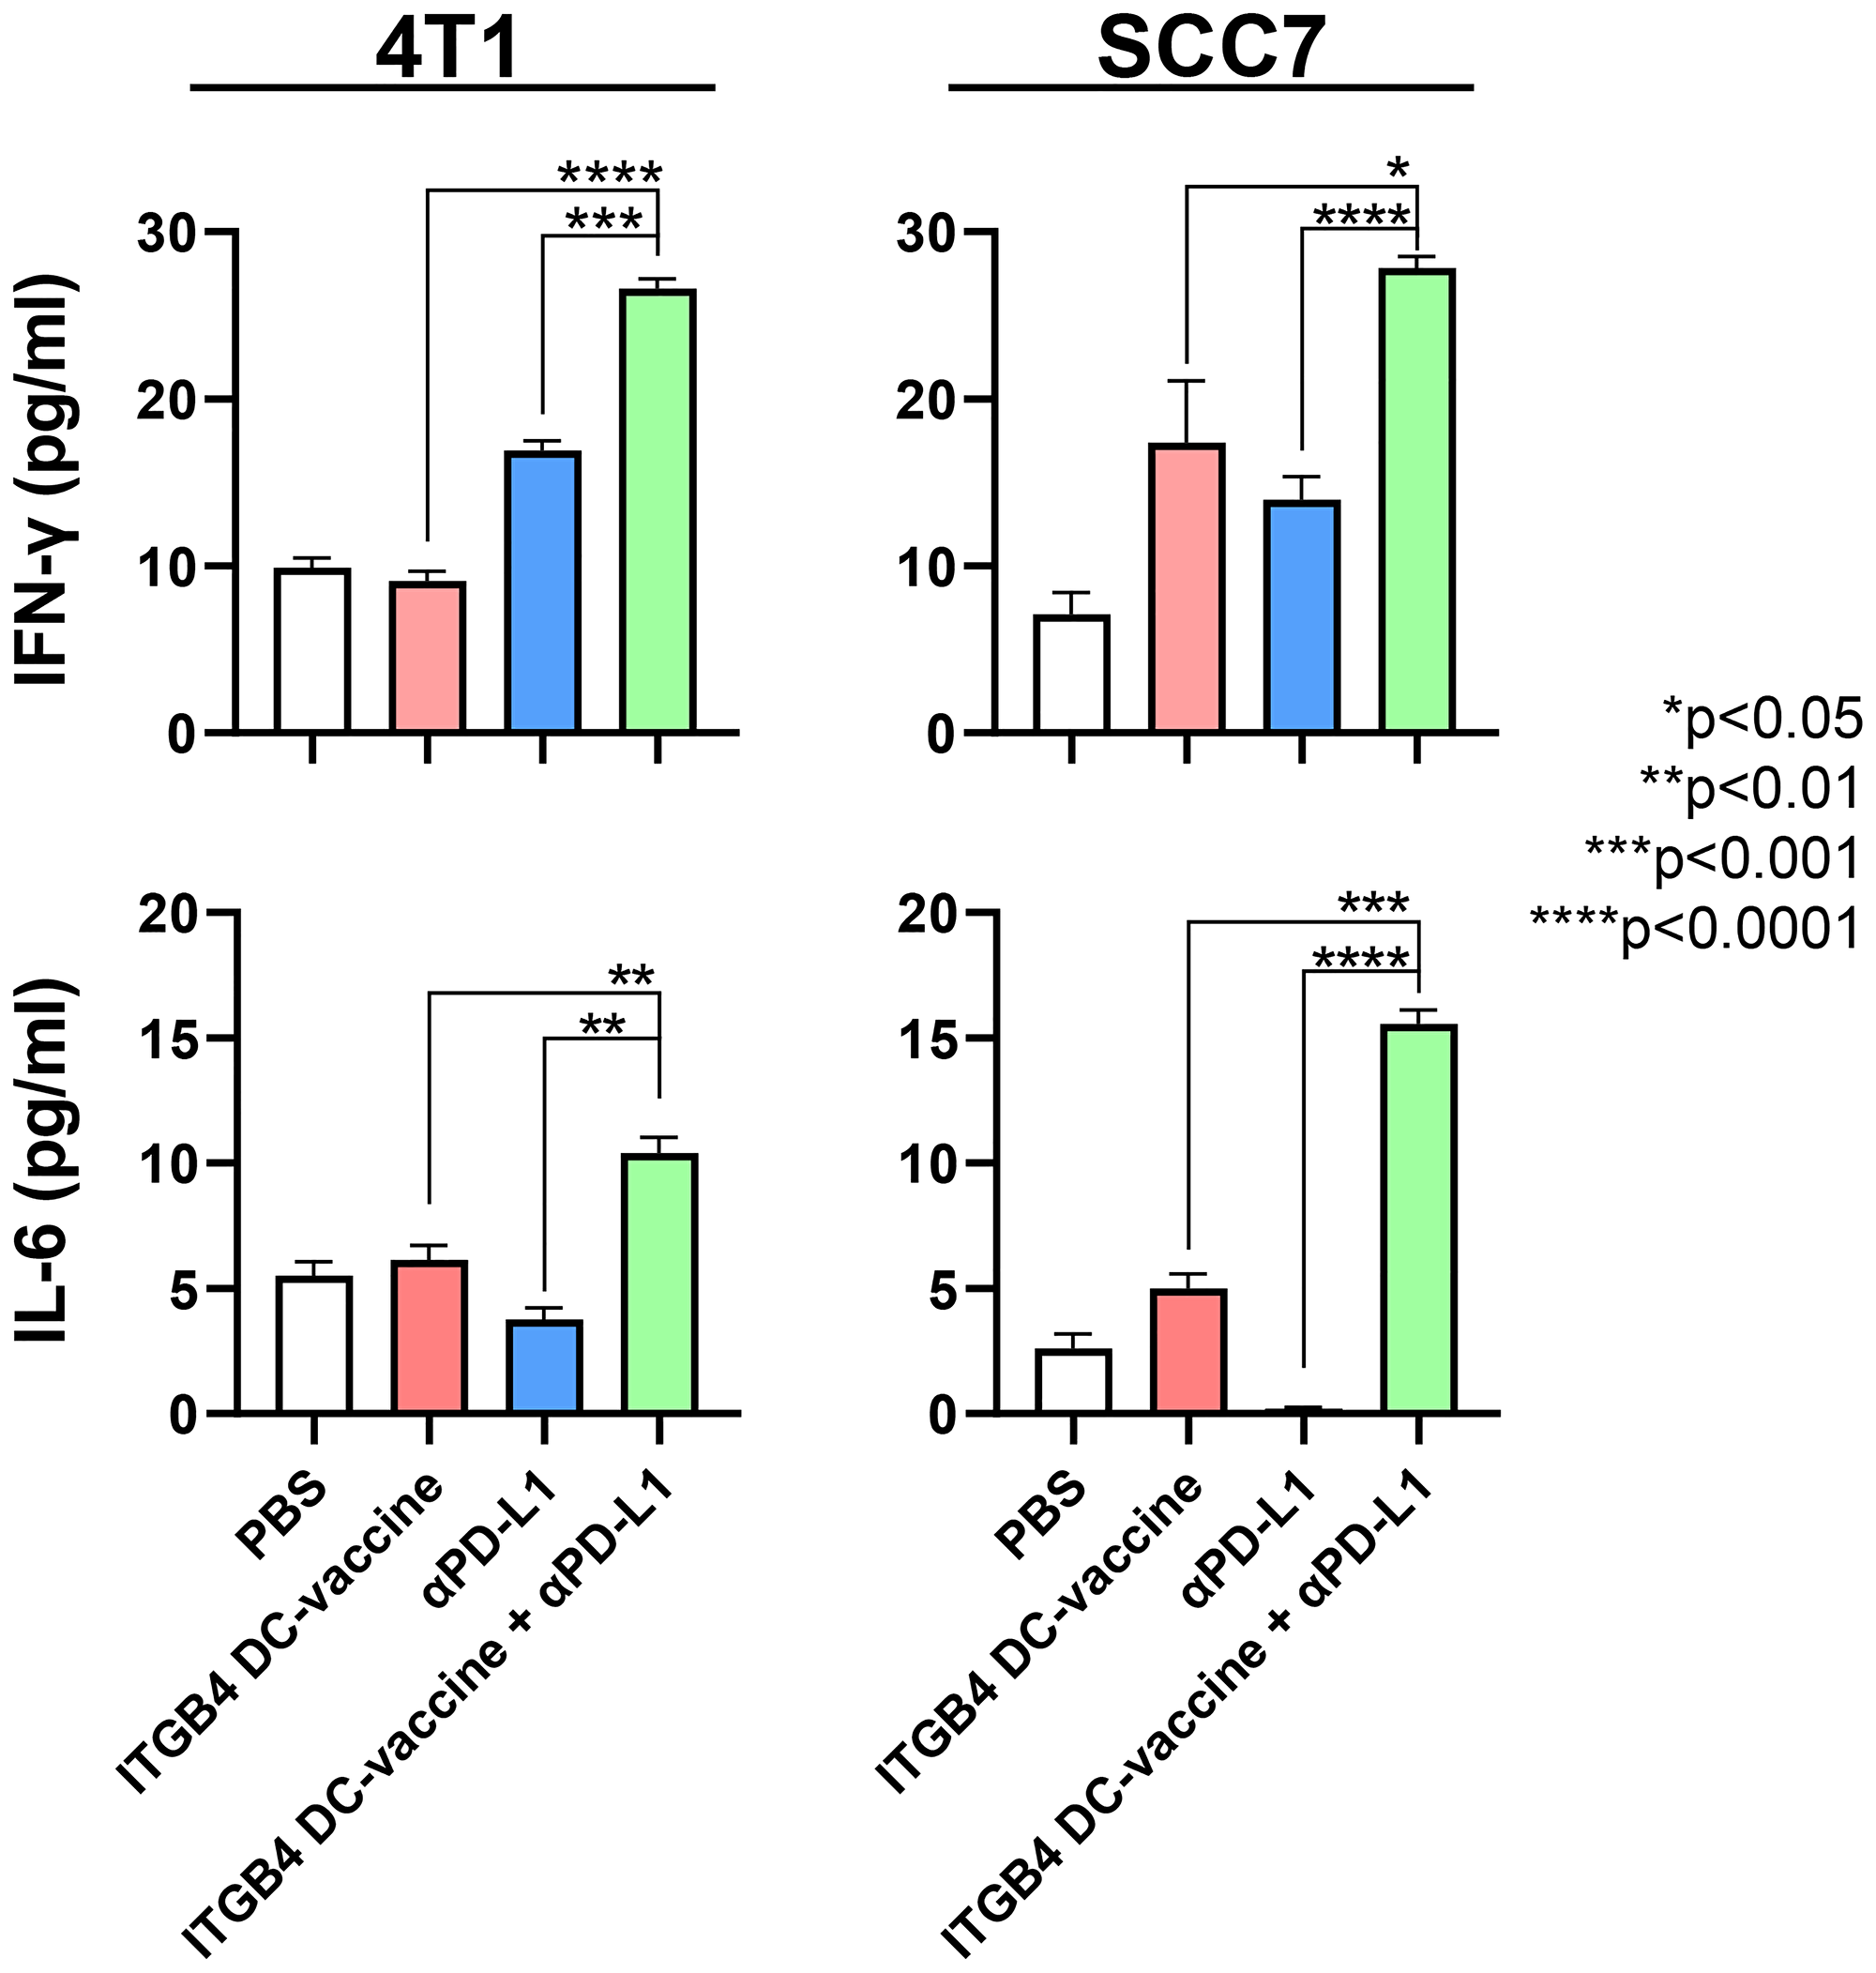 Serum concentrations of IFN-γ and IL-6 are significantly increased following vaccination with ITGB4-DCs combined with anti-PD-L1 administration.